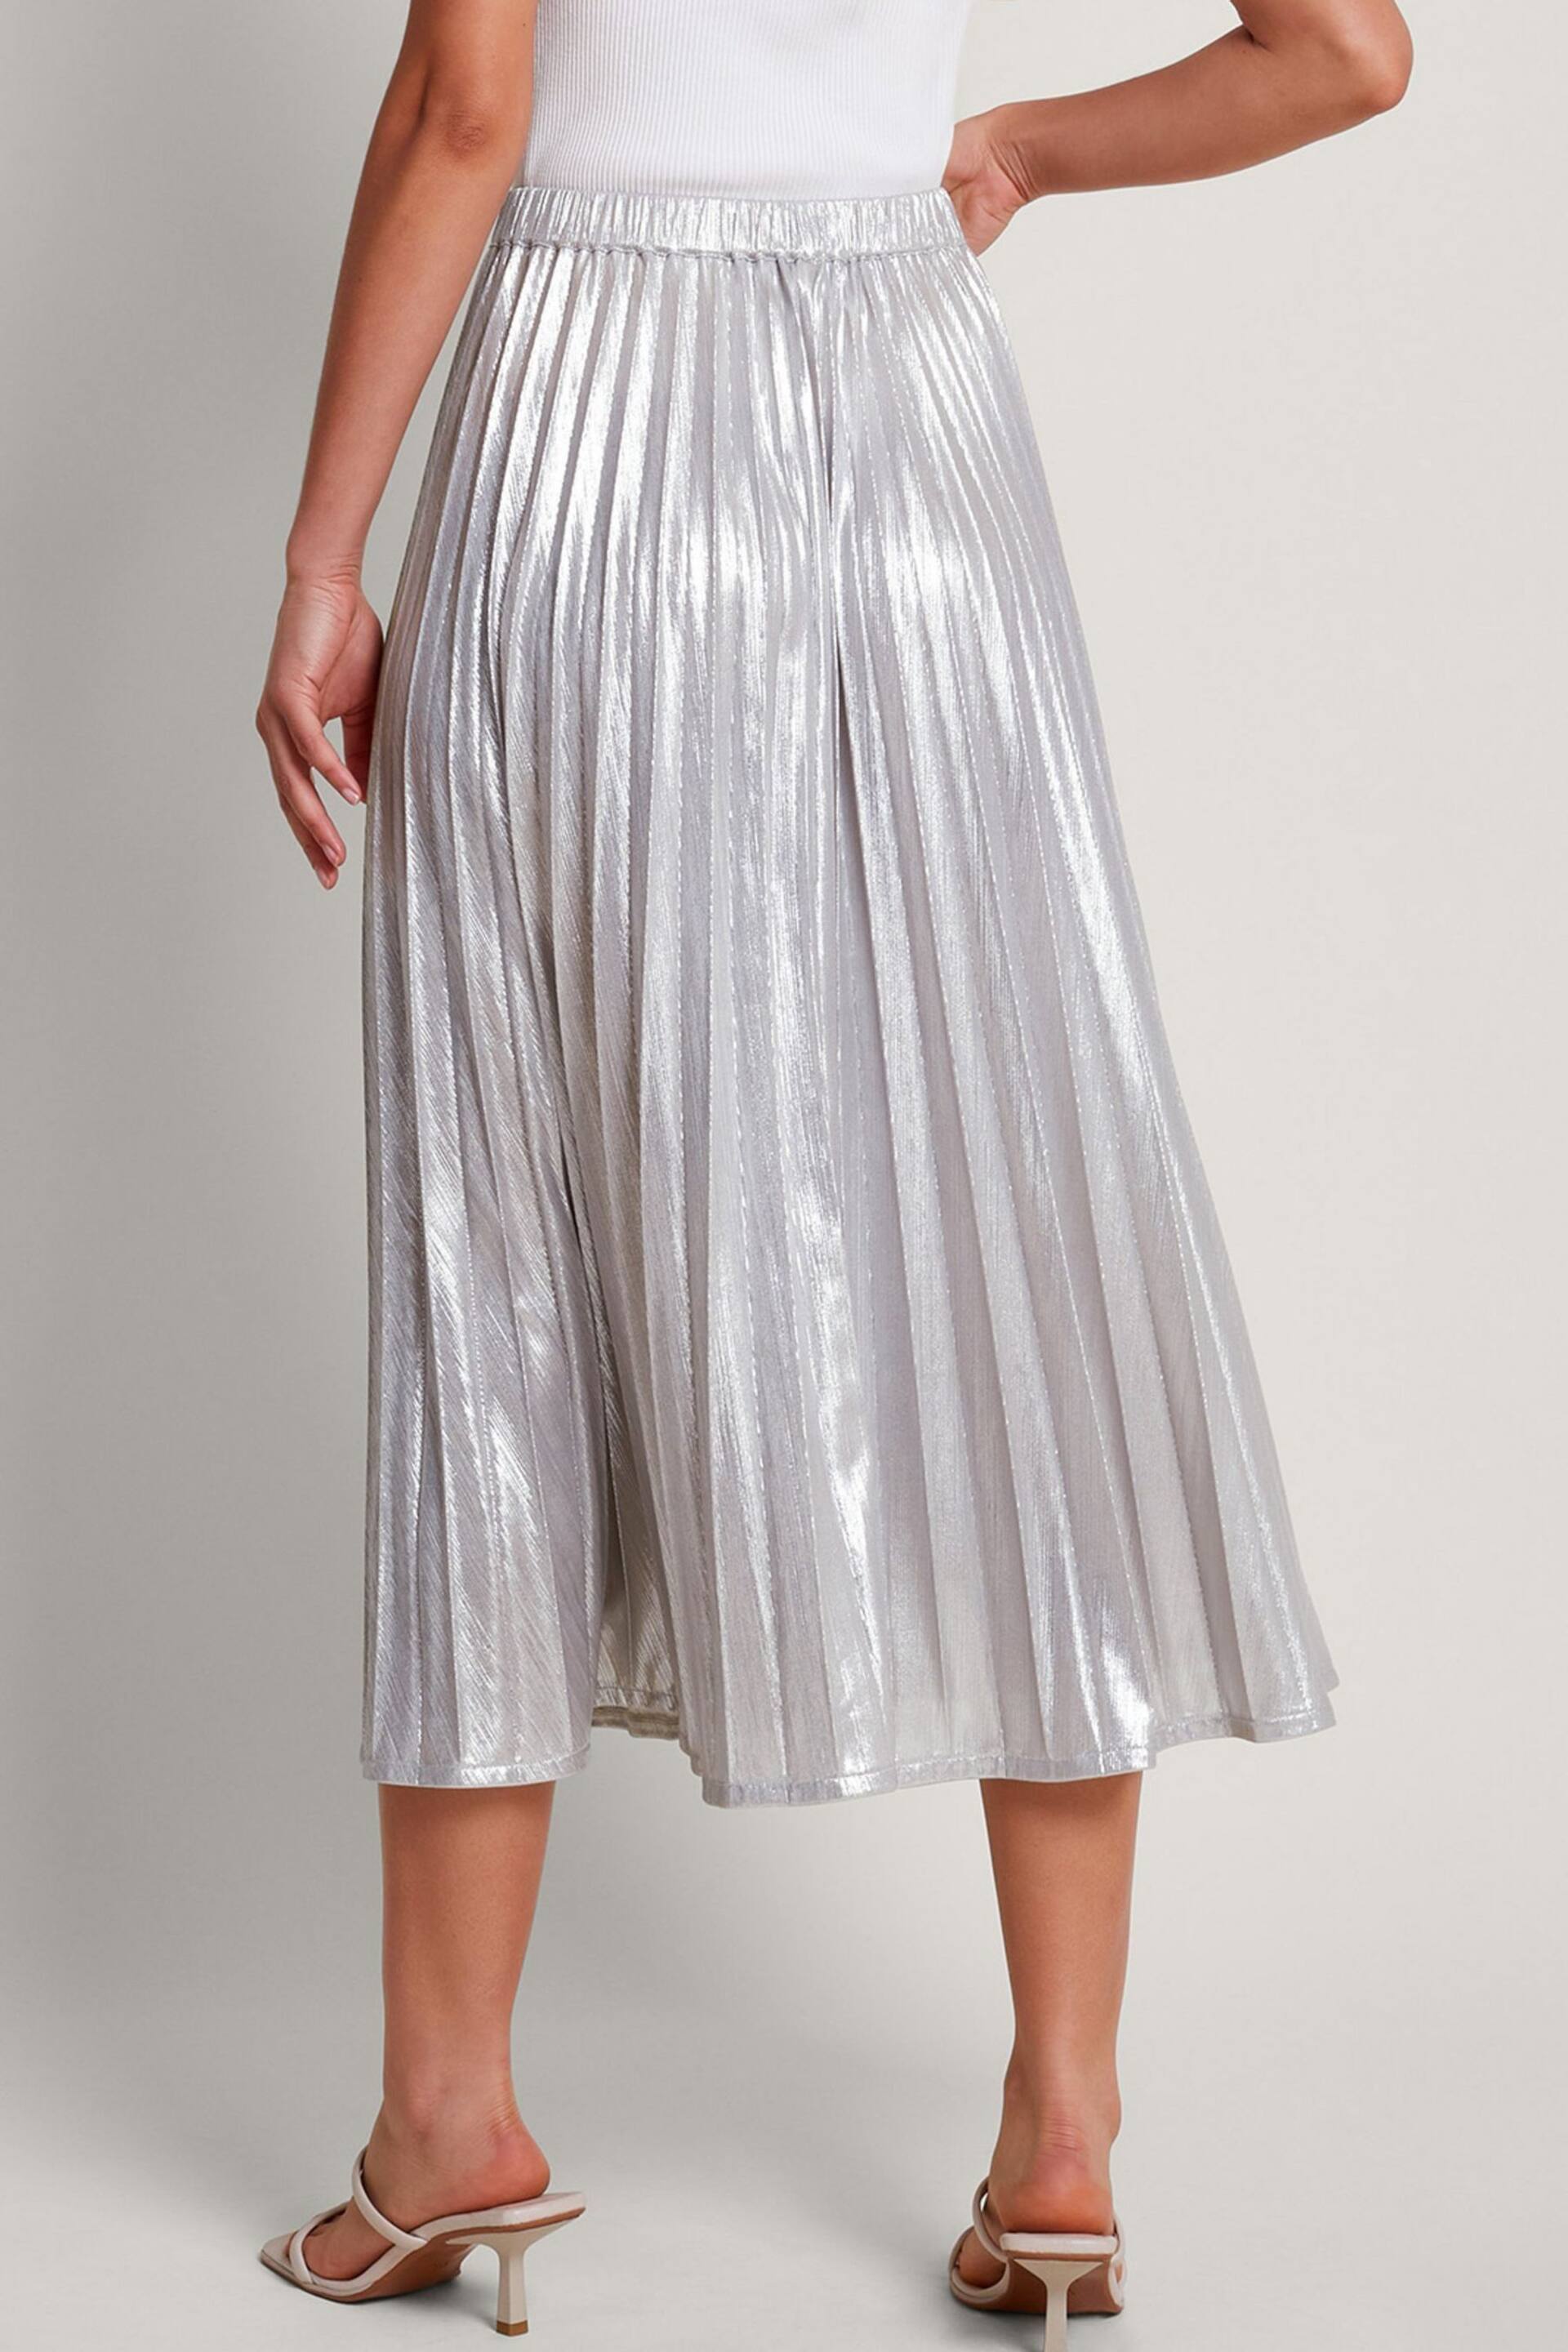 Monsoon Silver Mia Pleated Skirt - Image 4 of 4